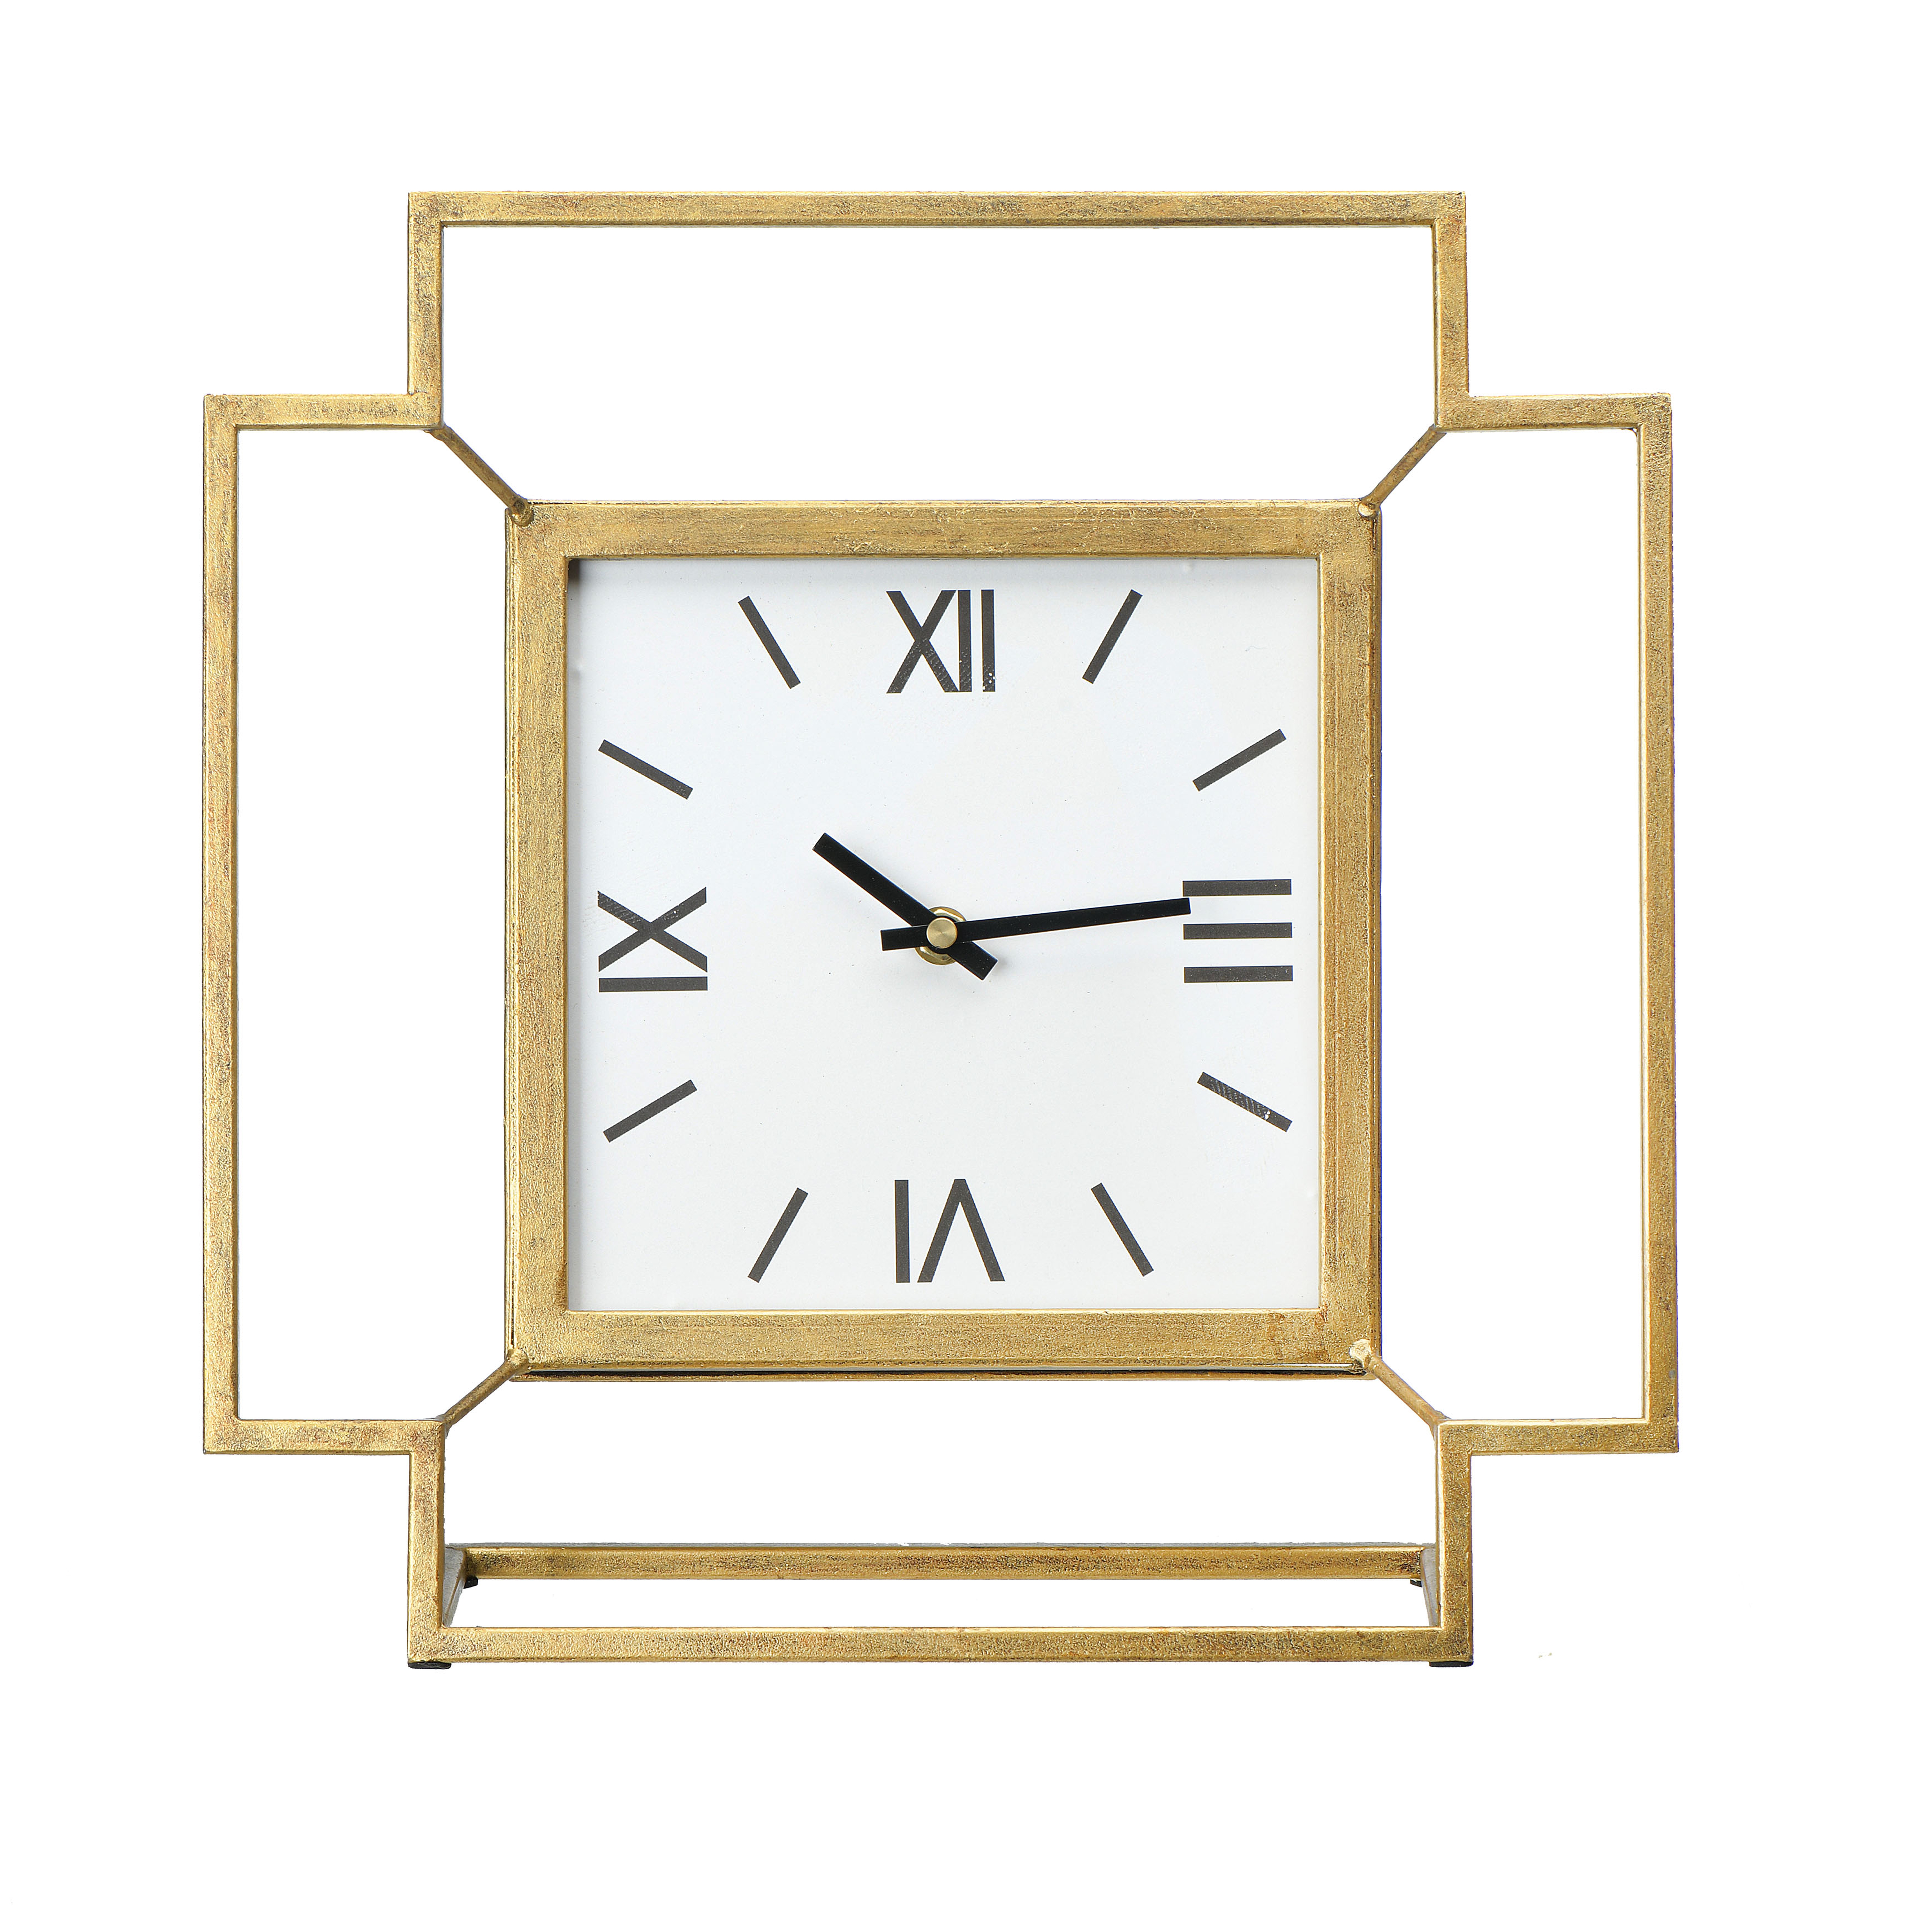 Antiqued Gold Square Mantel/Table Clock - Nomad Home